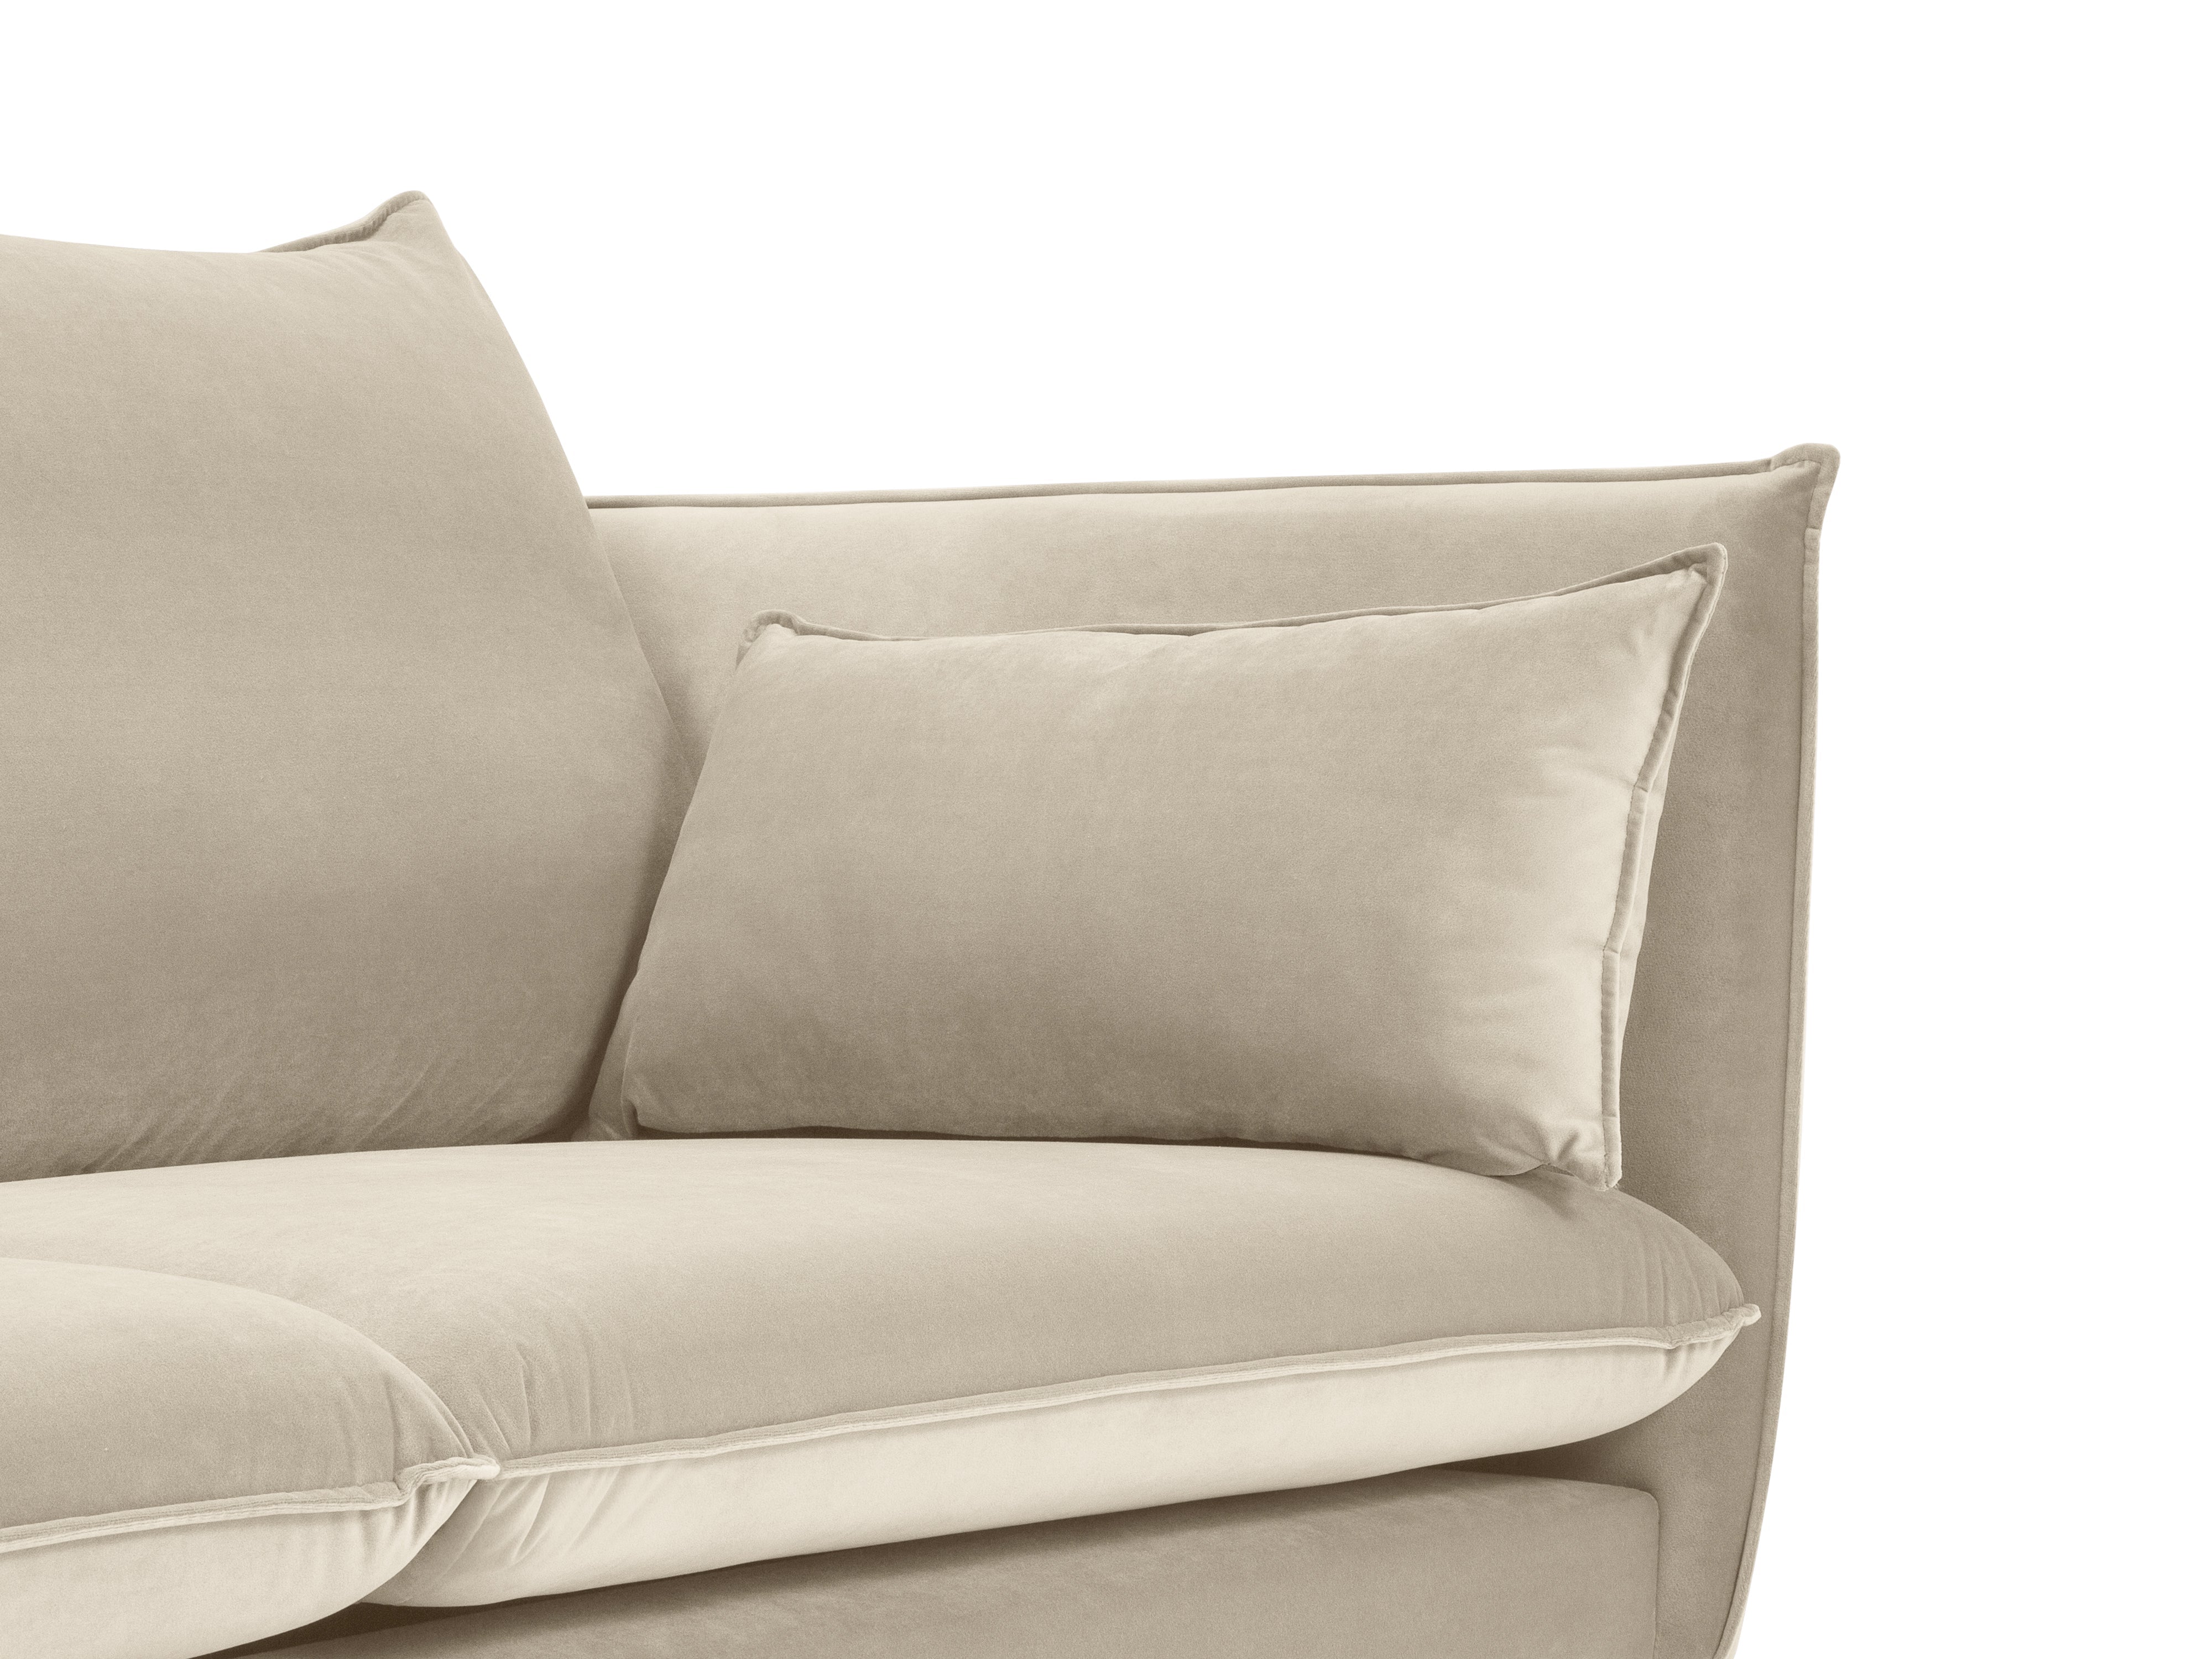 four -person sofa with pillows